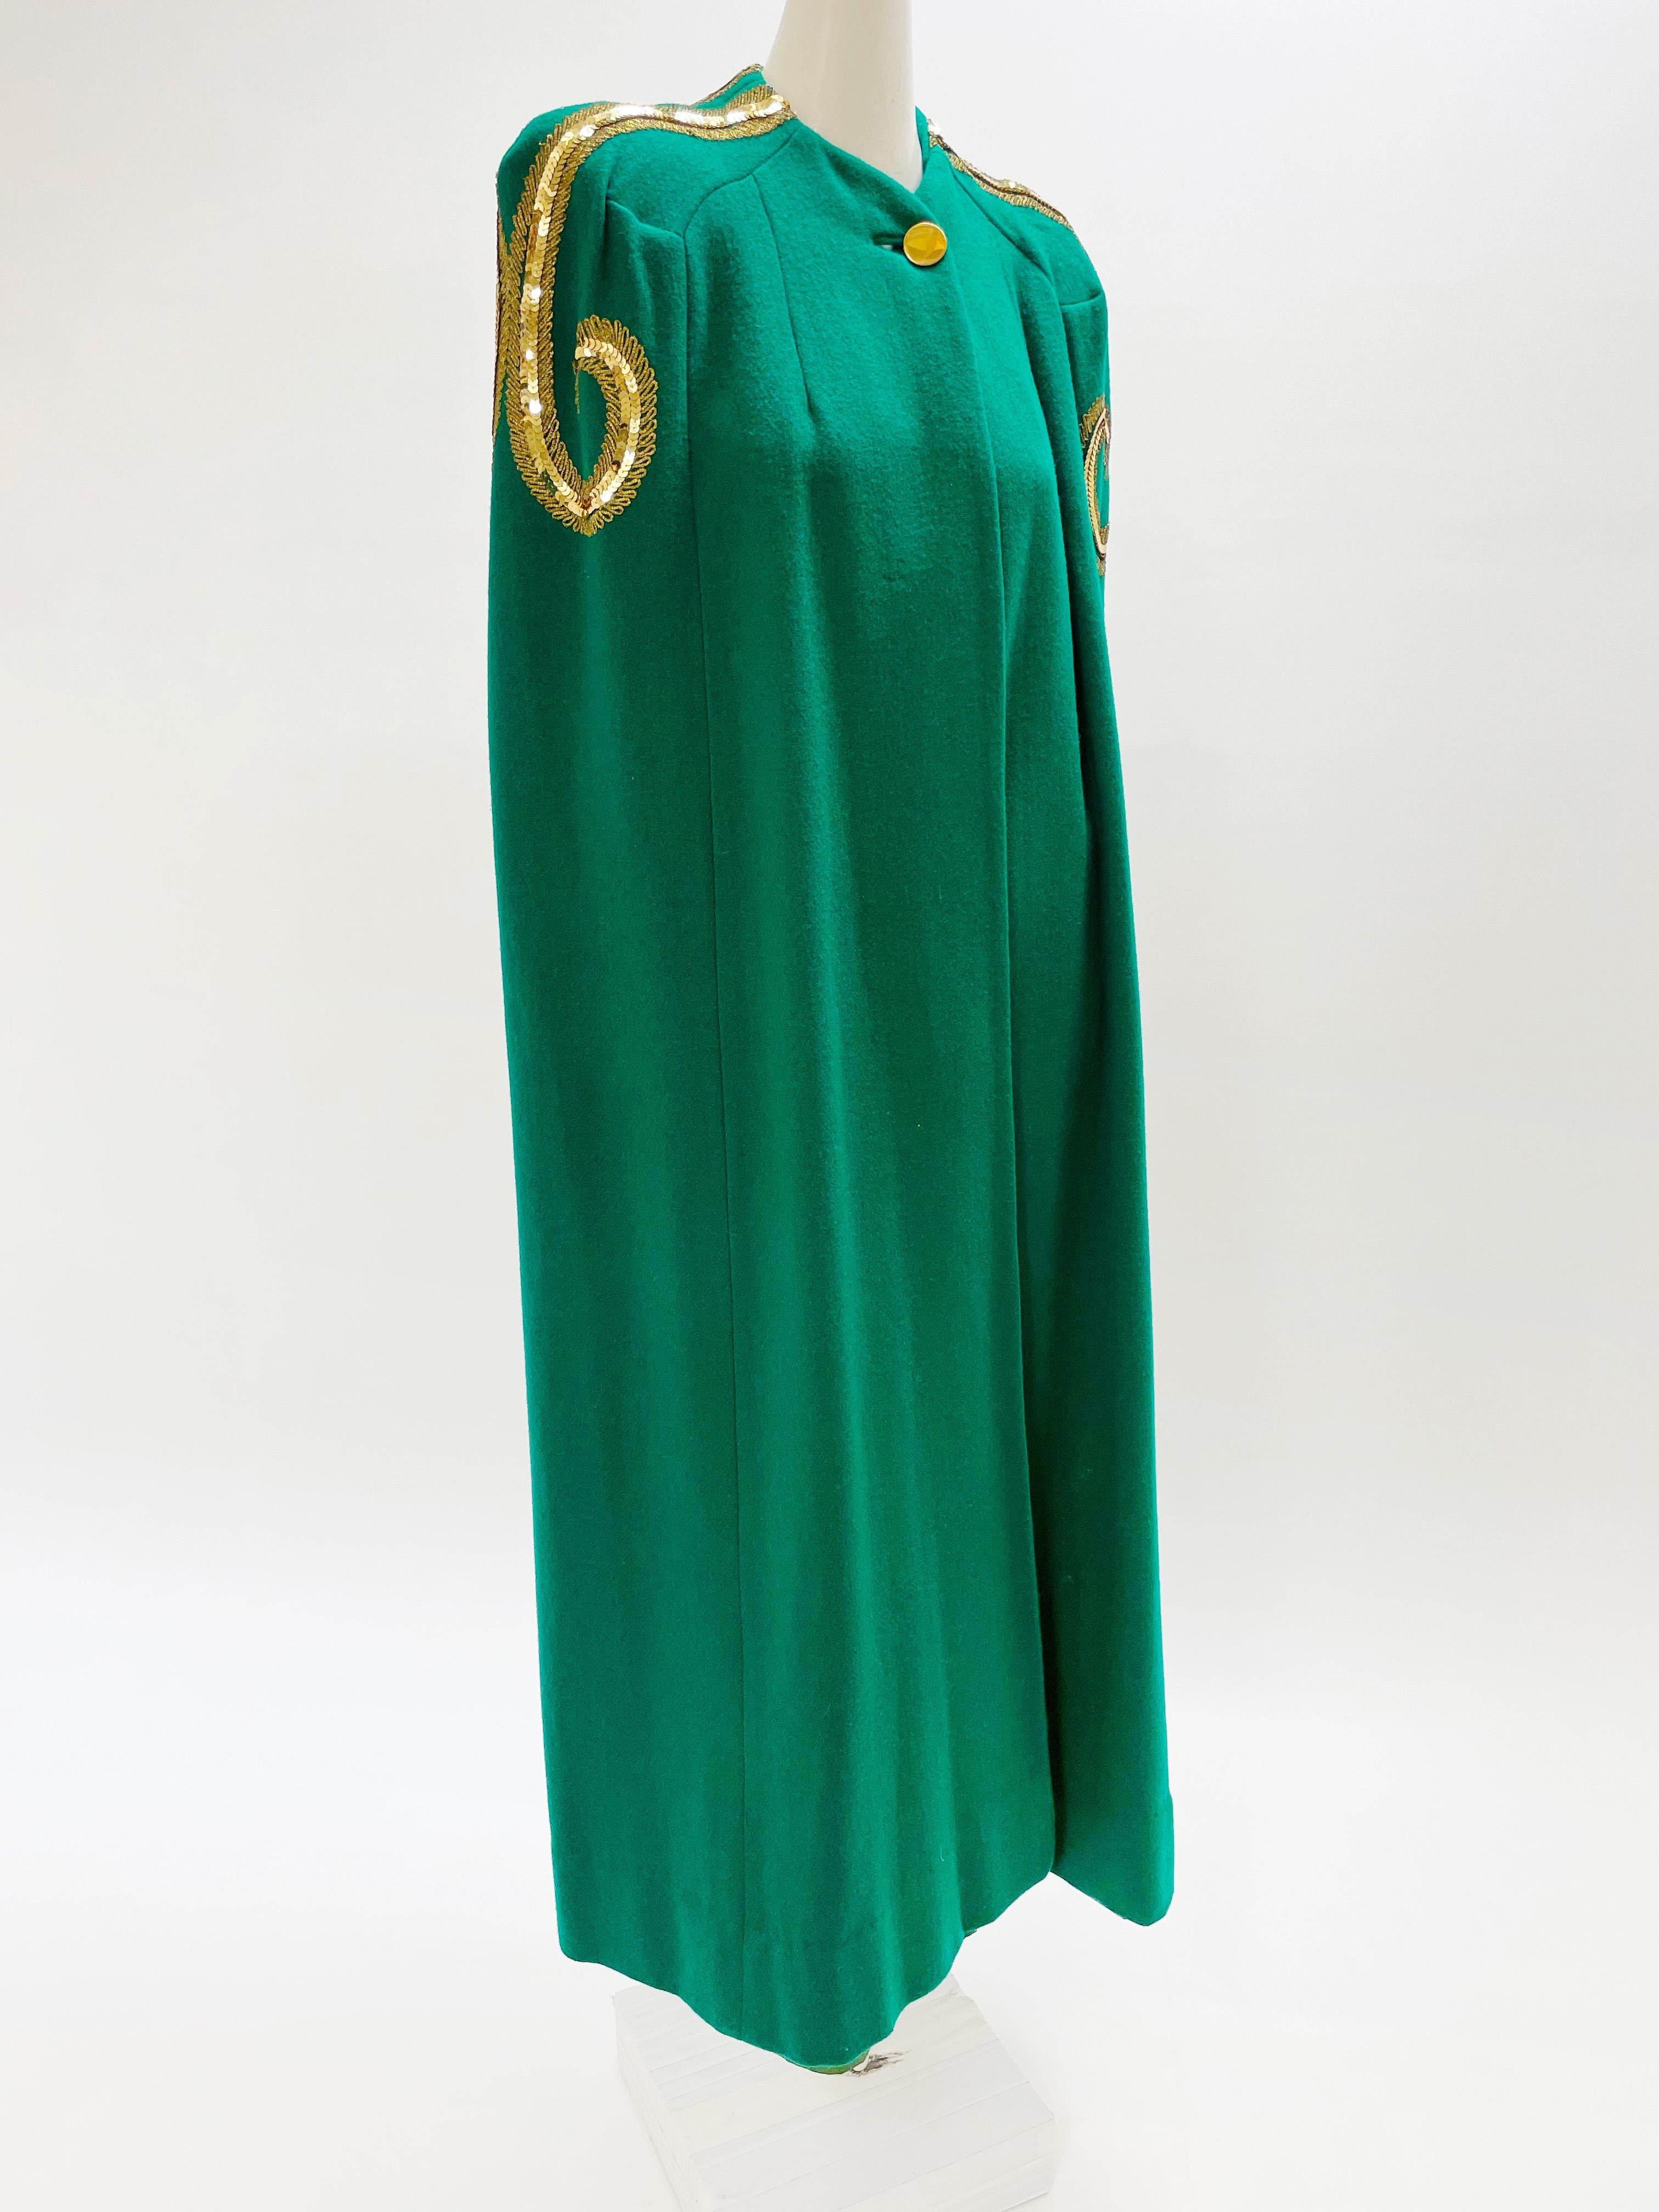 Blue 1940s Kelly Green Wool Cape w/ Gold Embroidery & Sequin Sculpted Shoulder Detail For Sale